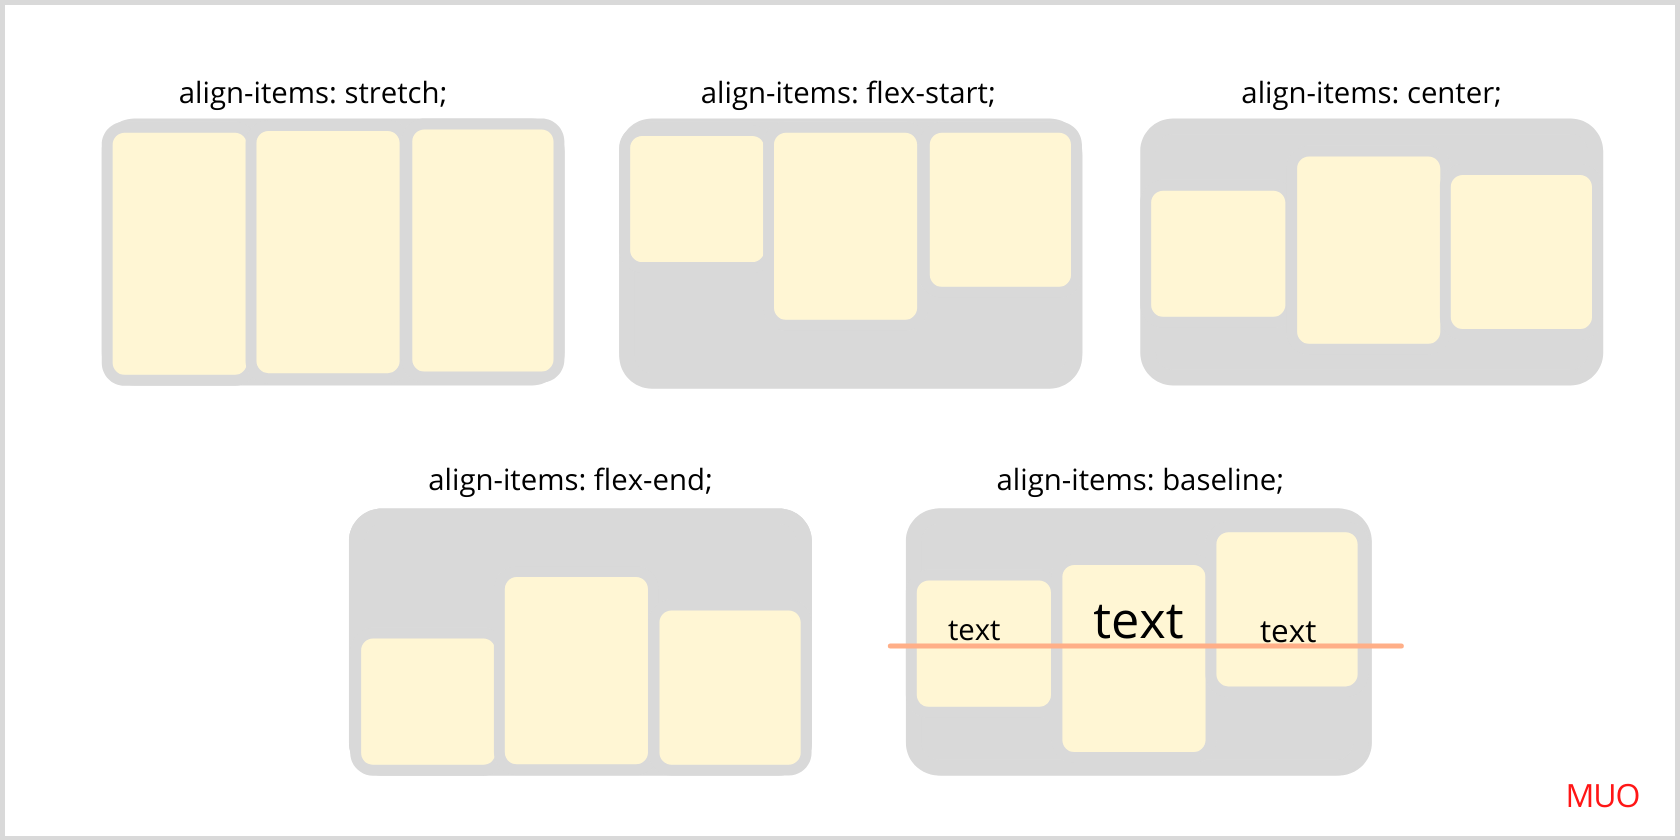 The align-items property in CSS Flexbox